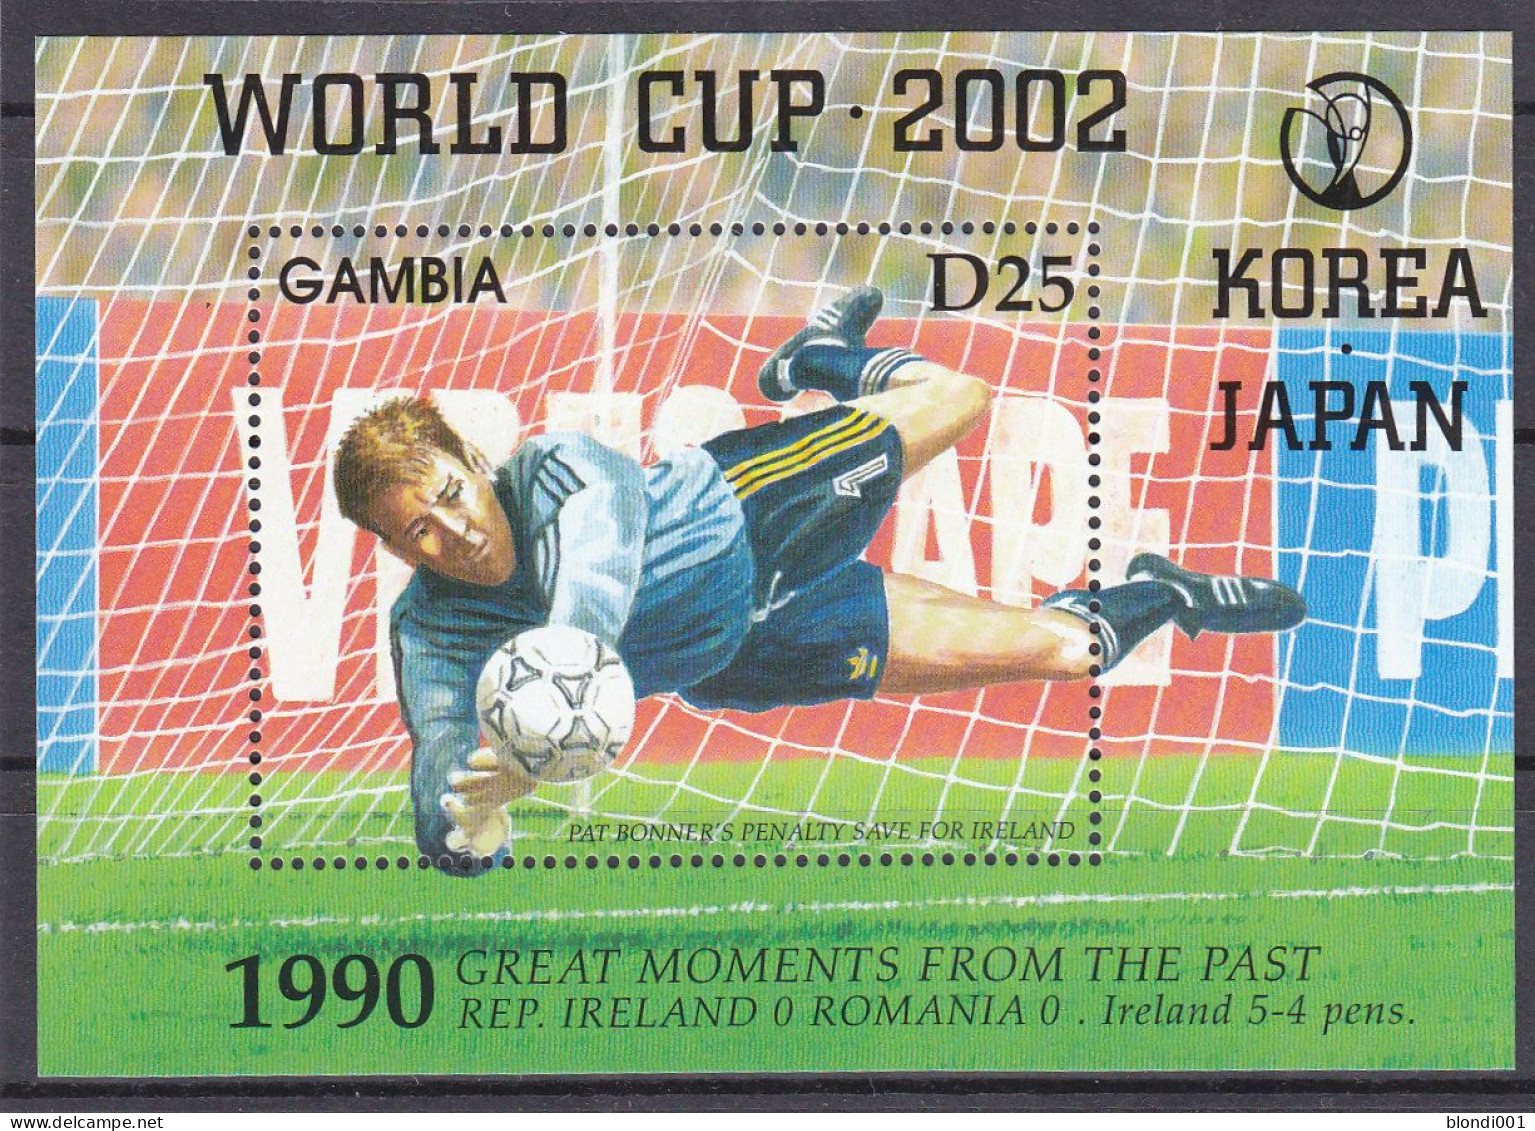 Soccer World Cup 2002 - GAMBIA - S/S MNH - 2002 – South Korea / Japan